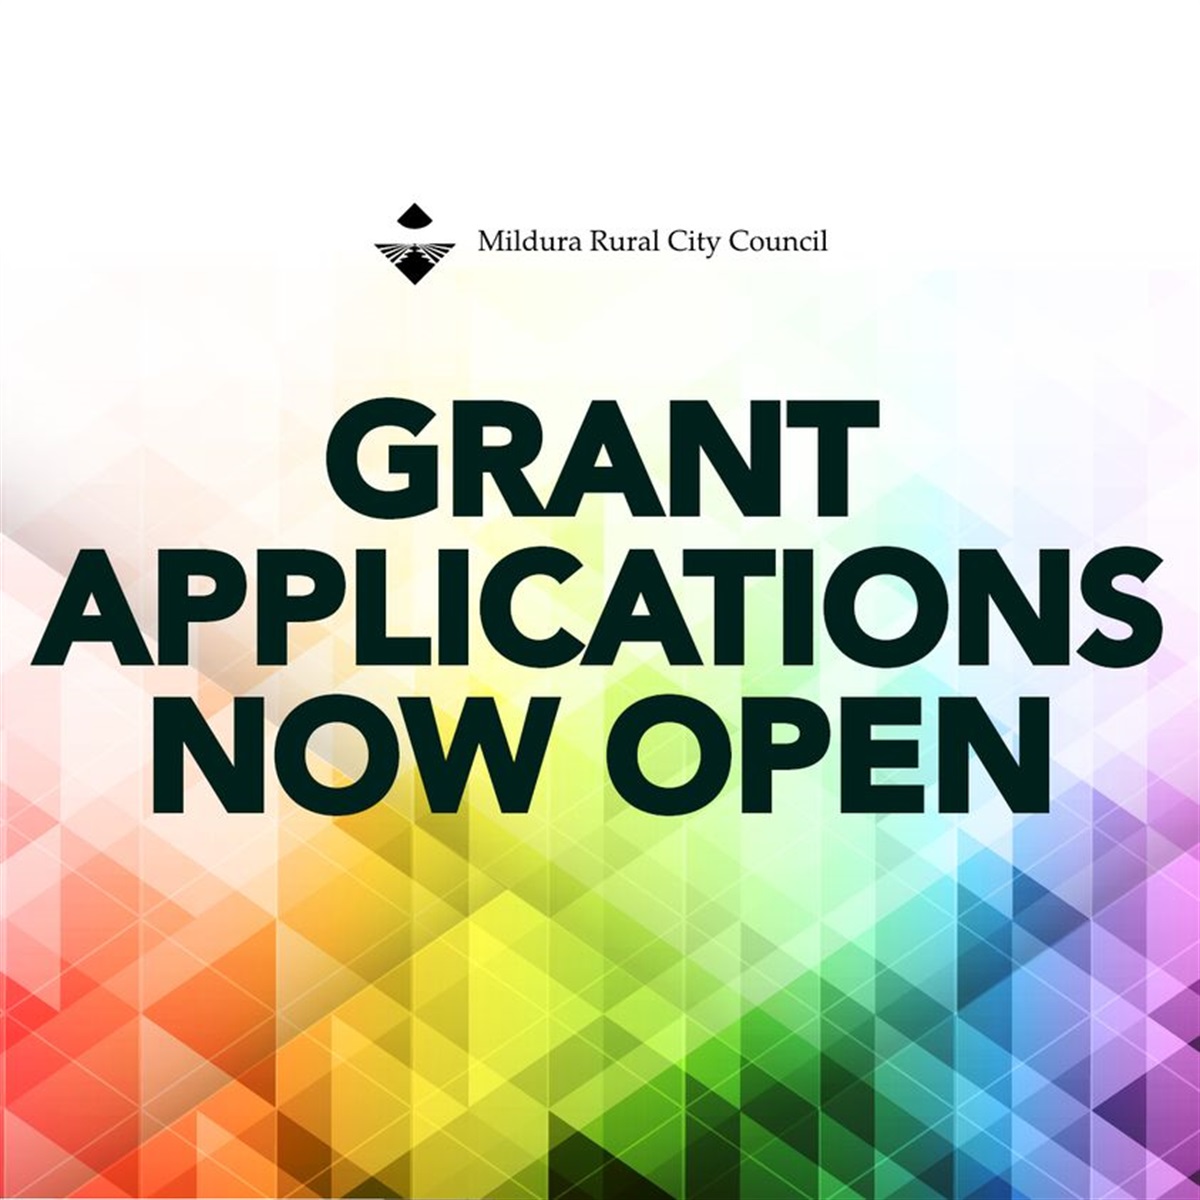 Three Council grant programs now open for applications